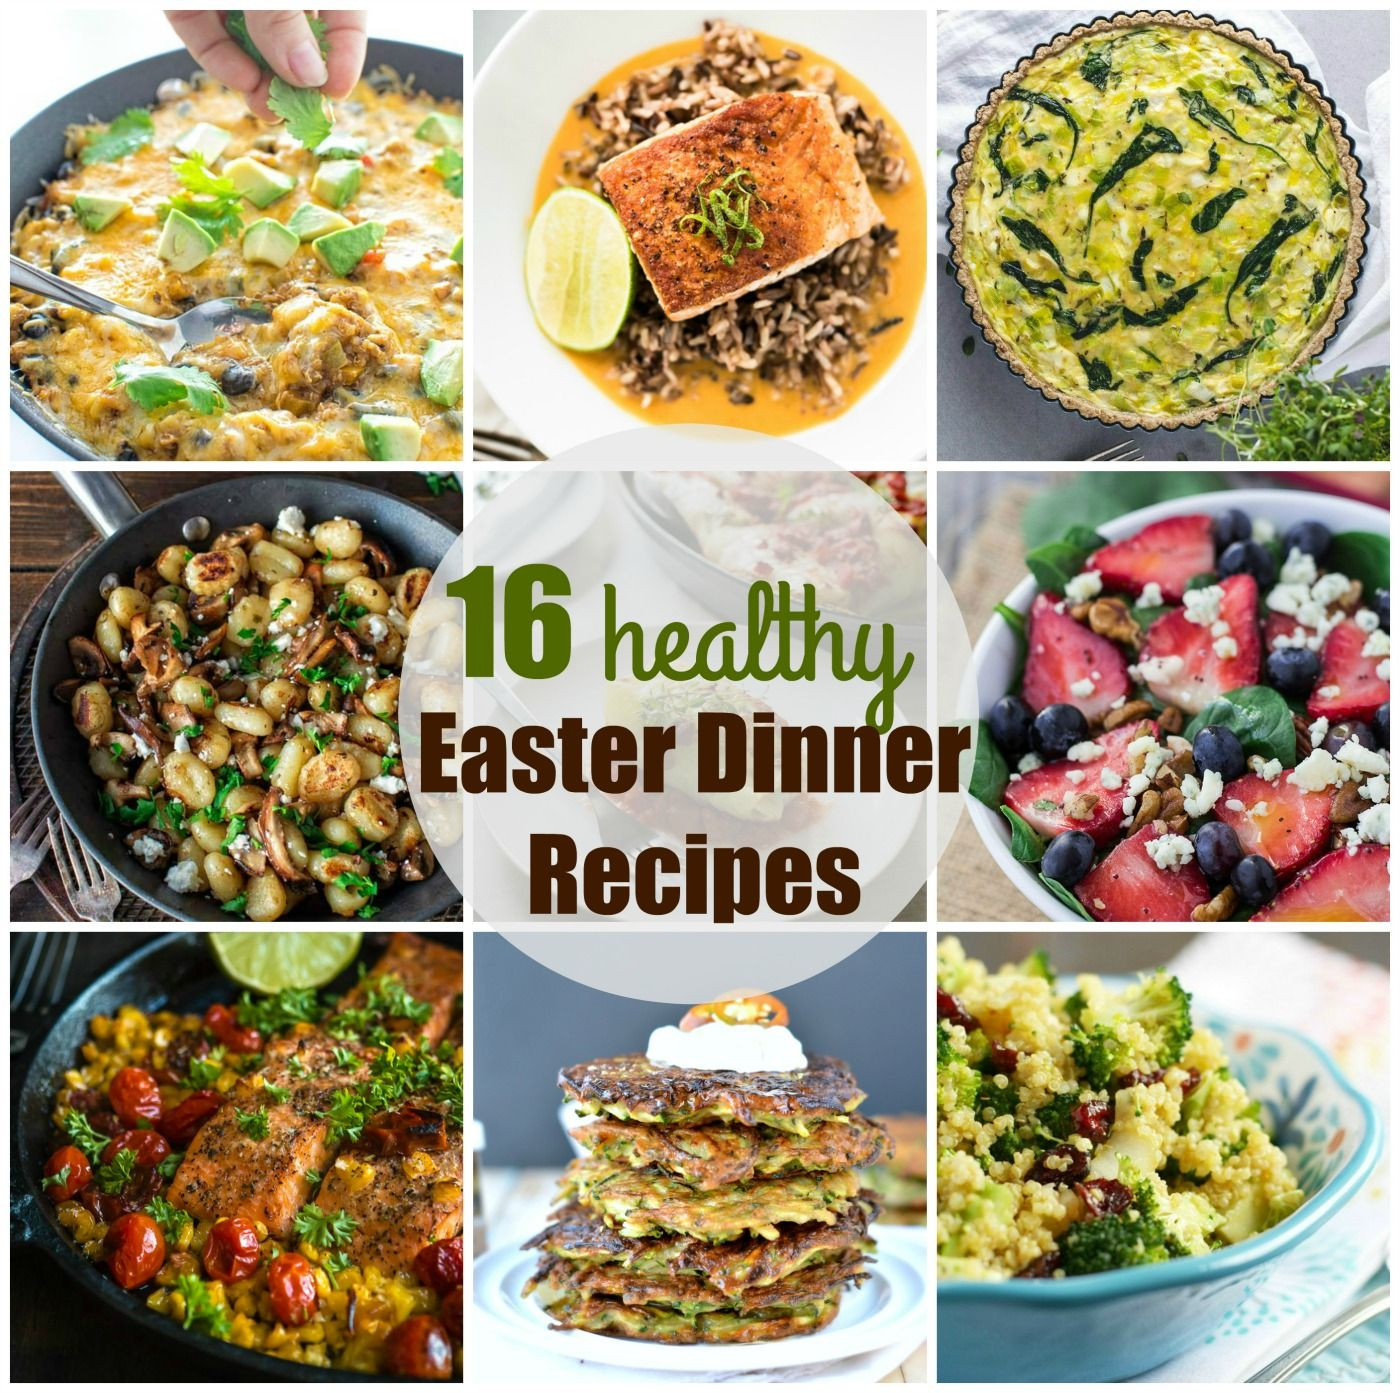 Healthy Easter Dinner Recipes
 16 Healthy Easter dinner recipes alternatives to Easter